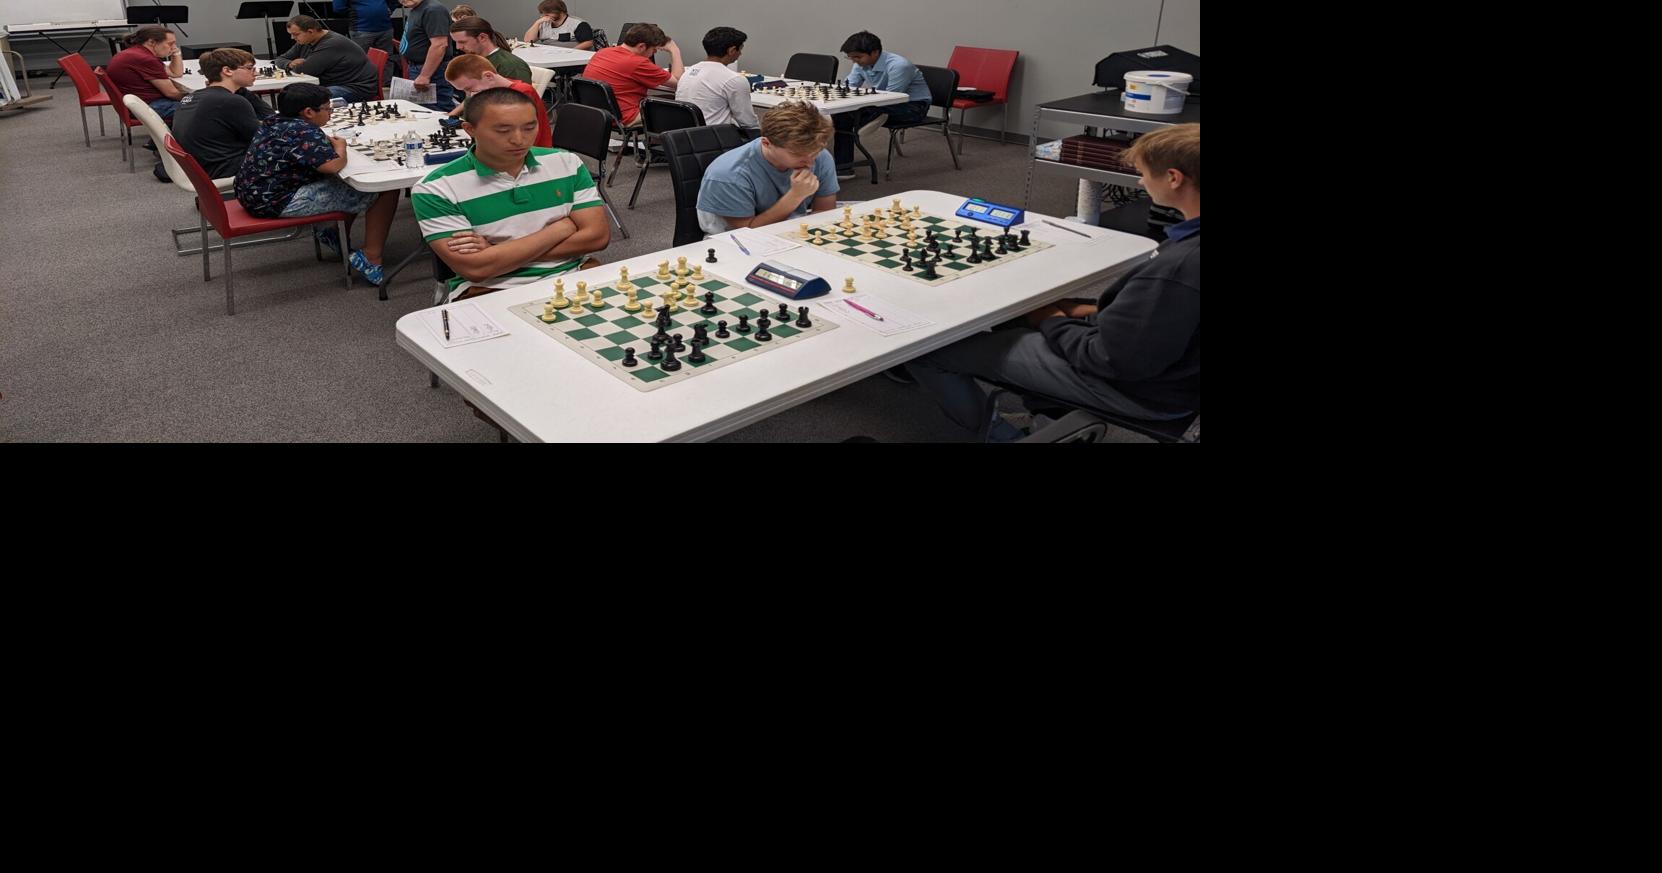 Short Takes: Omaha Chess Club finds a home at last